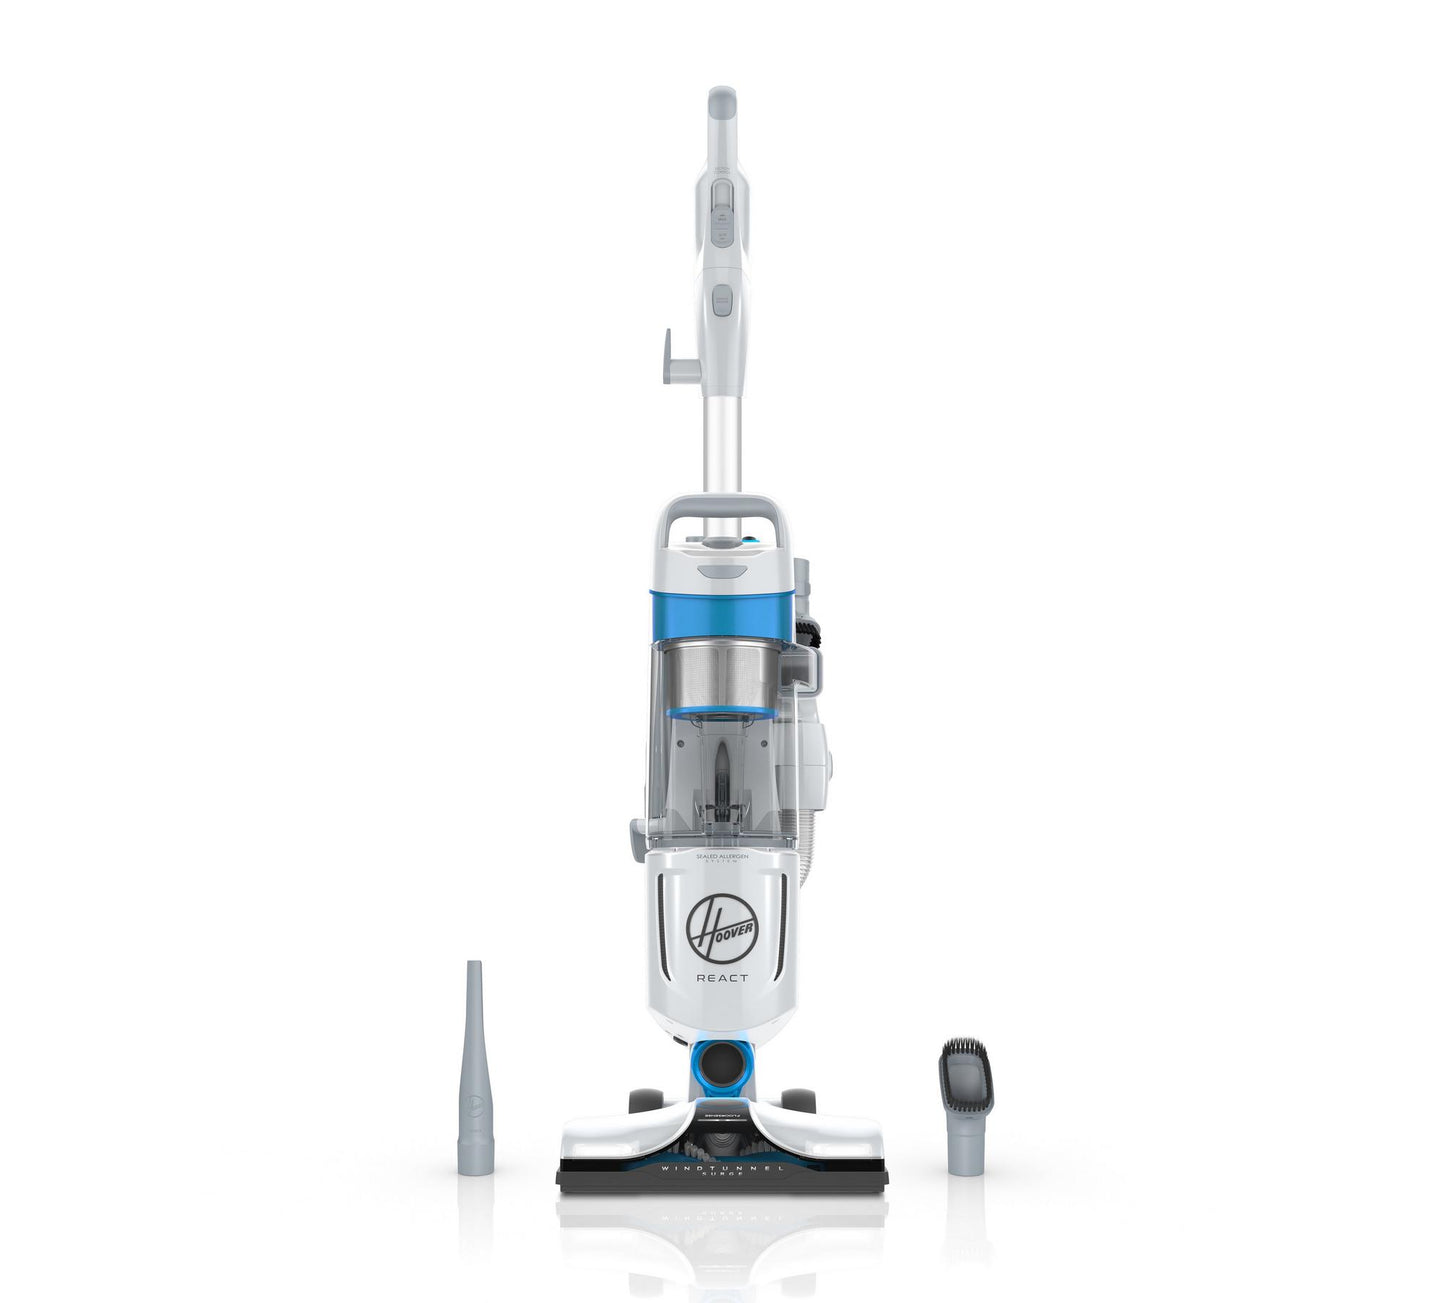 Buy the Hoover REACT Upright Vacuum